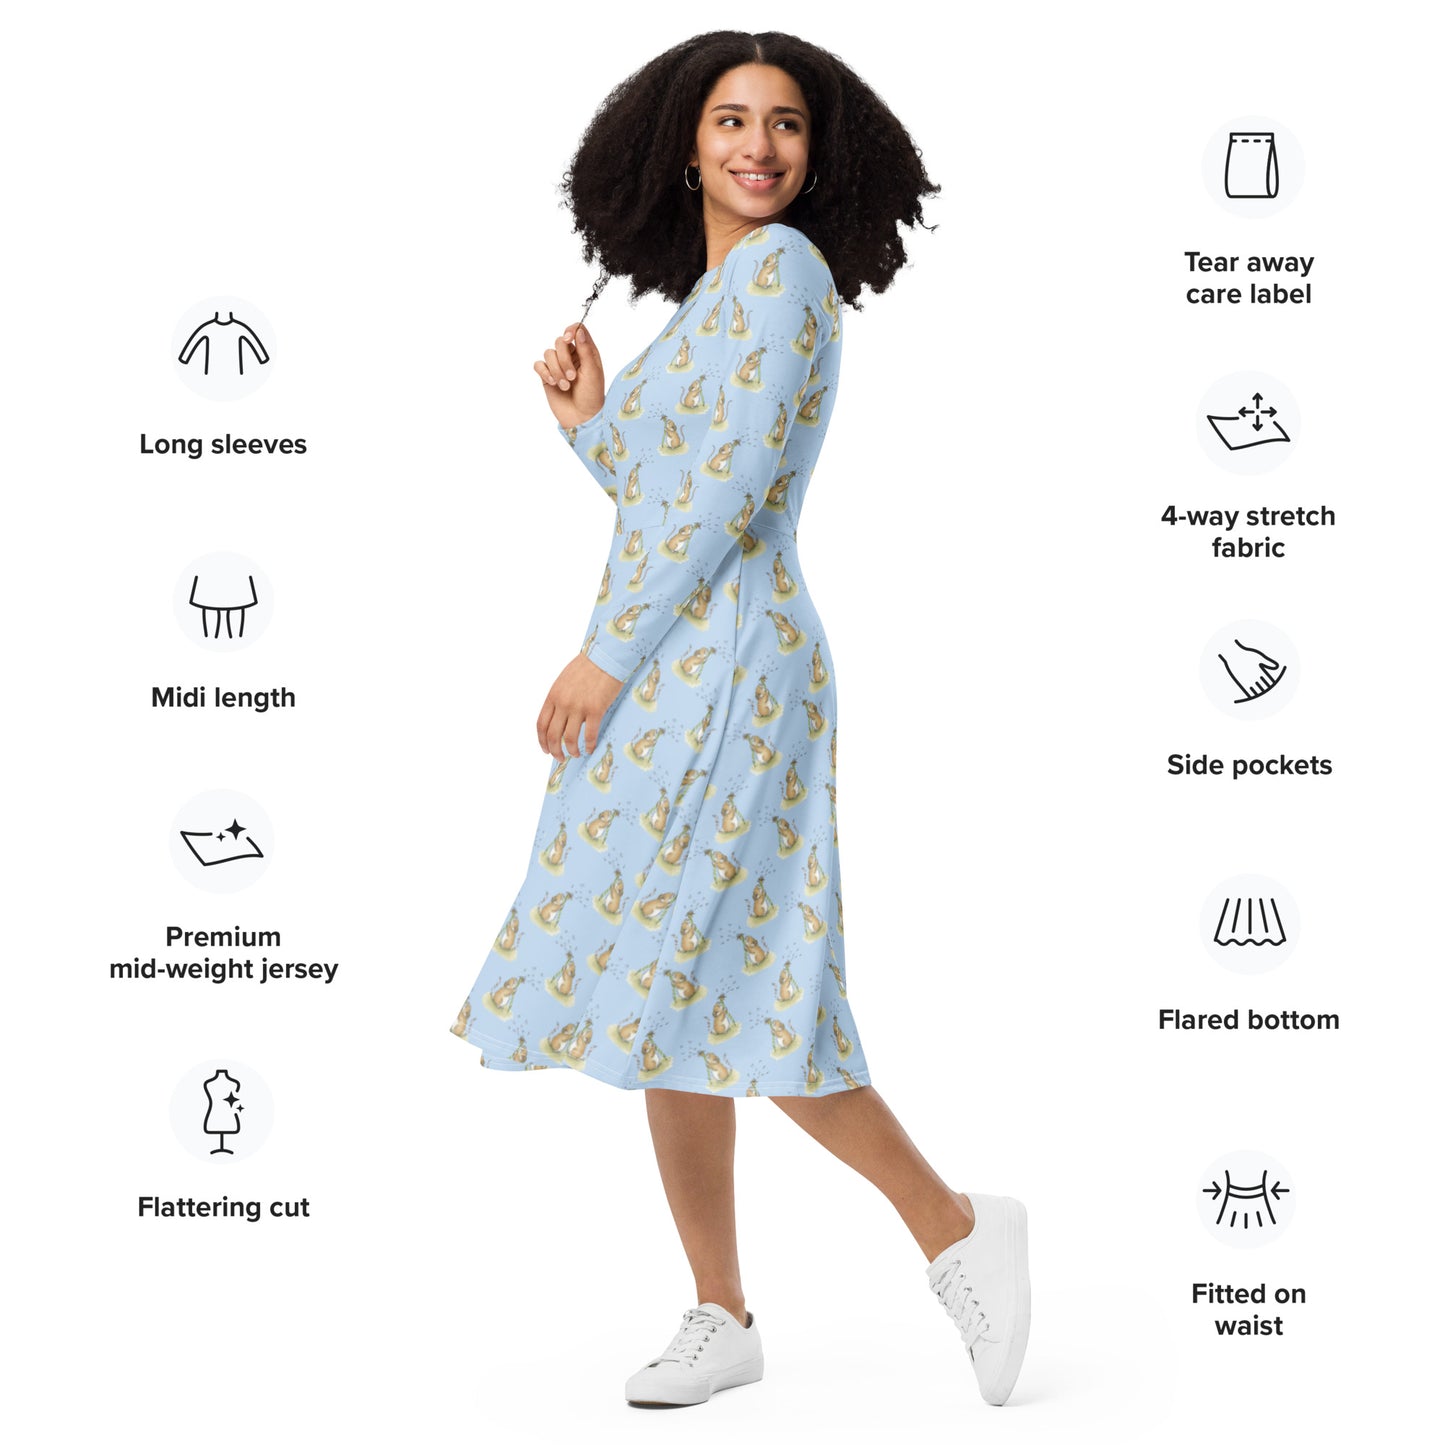 Dandelion Wish patterned long sleeve midi dress. Features patterned design of a mouse making a wish on a dandelion fluff against a light blue background. Dress has boat neckline, fitted waist, flared bottom, and side pockets.  Shown on female model facing left.